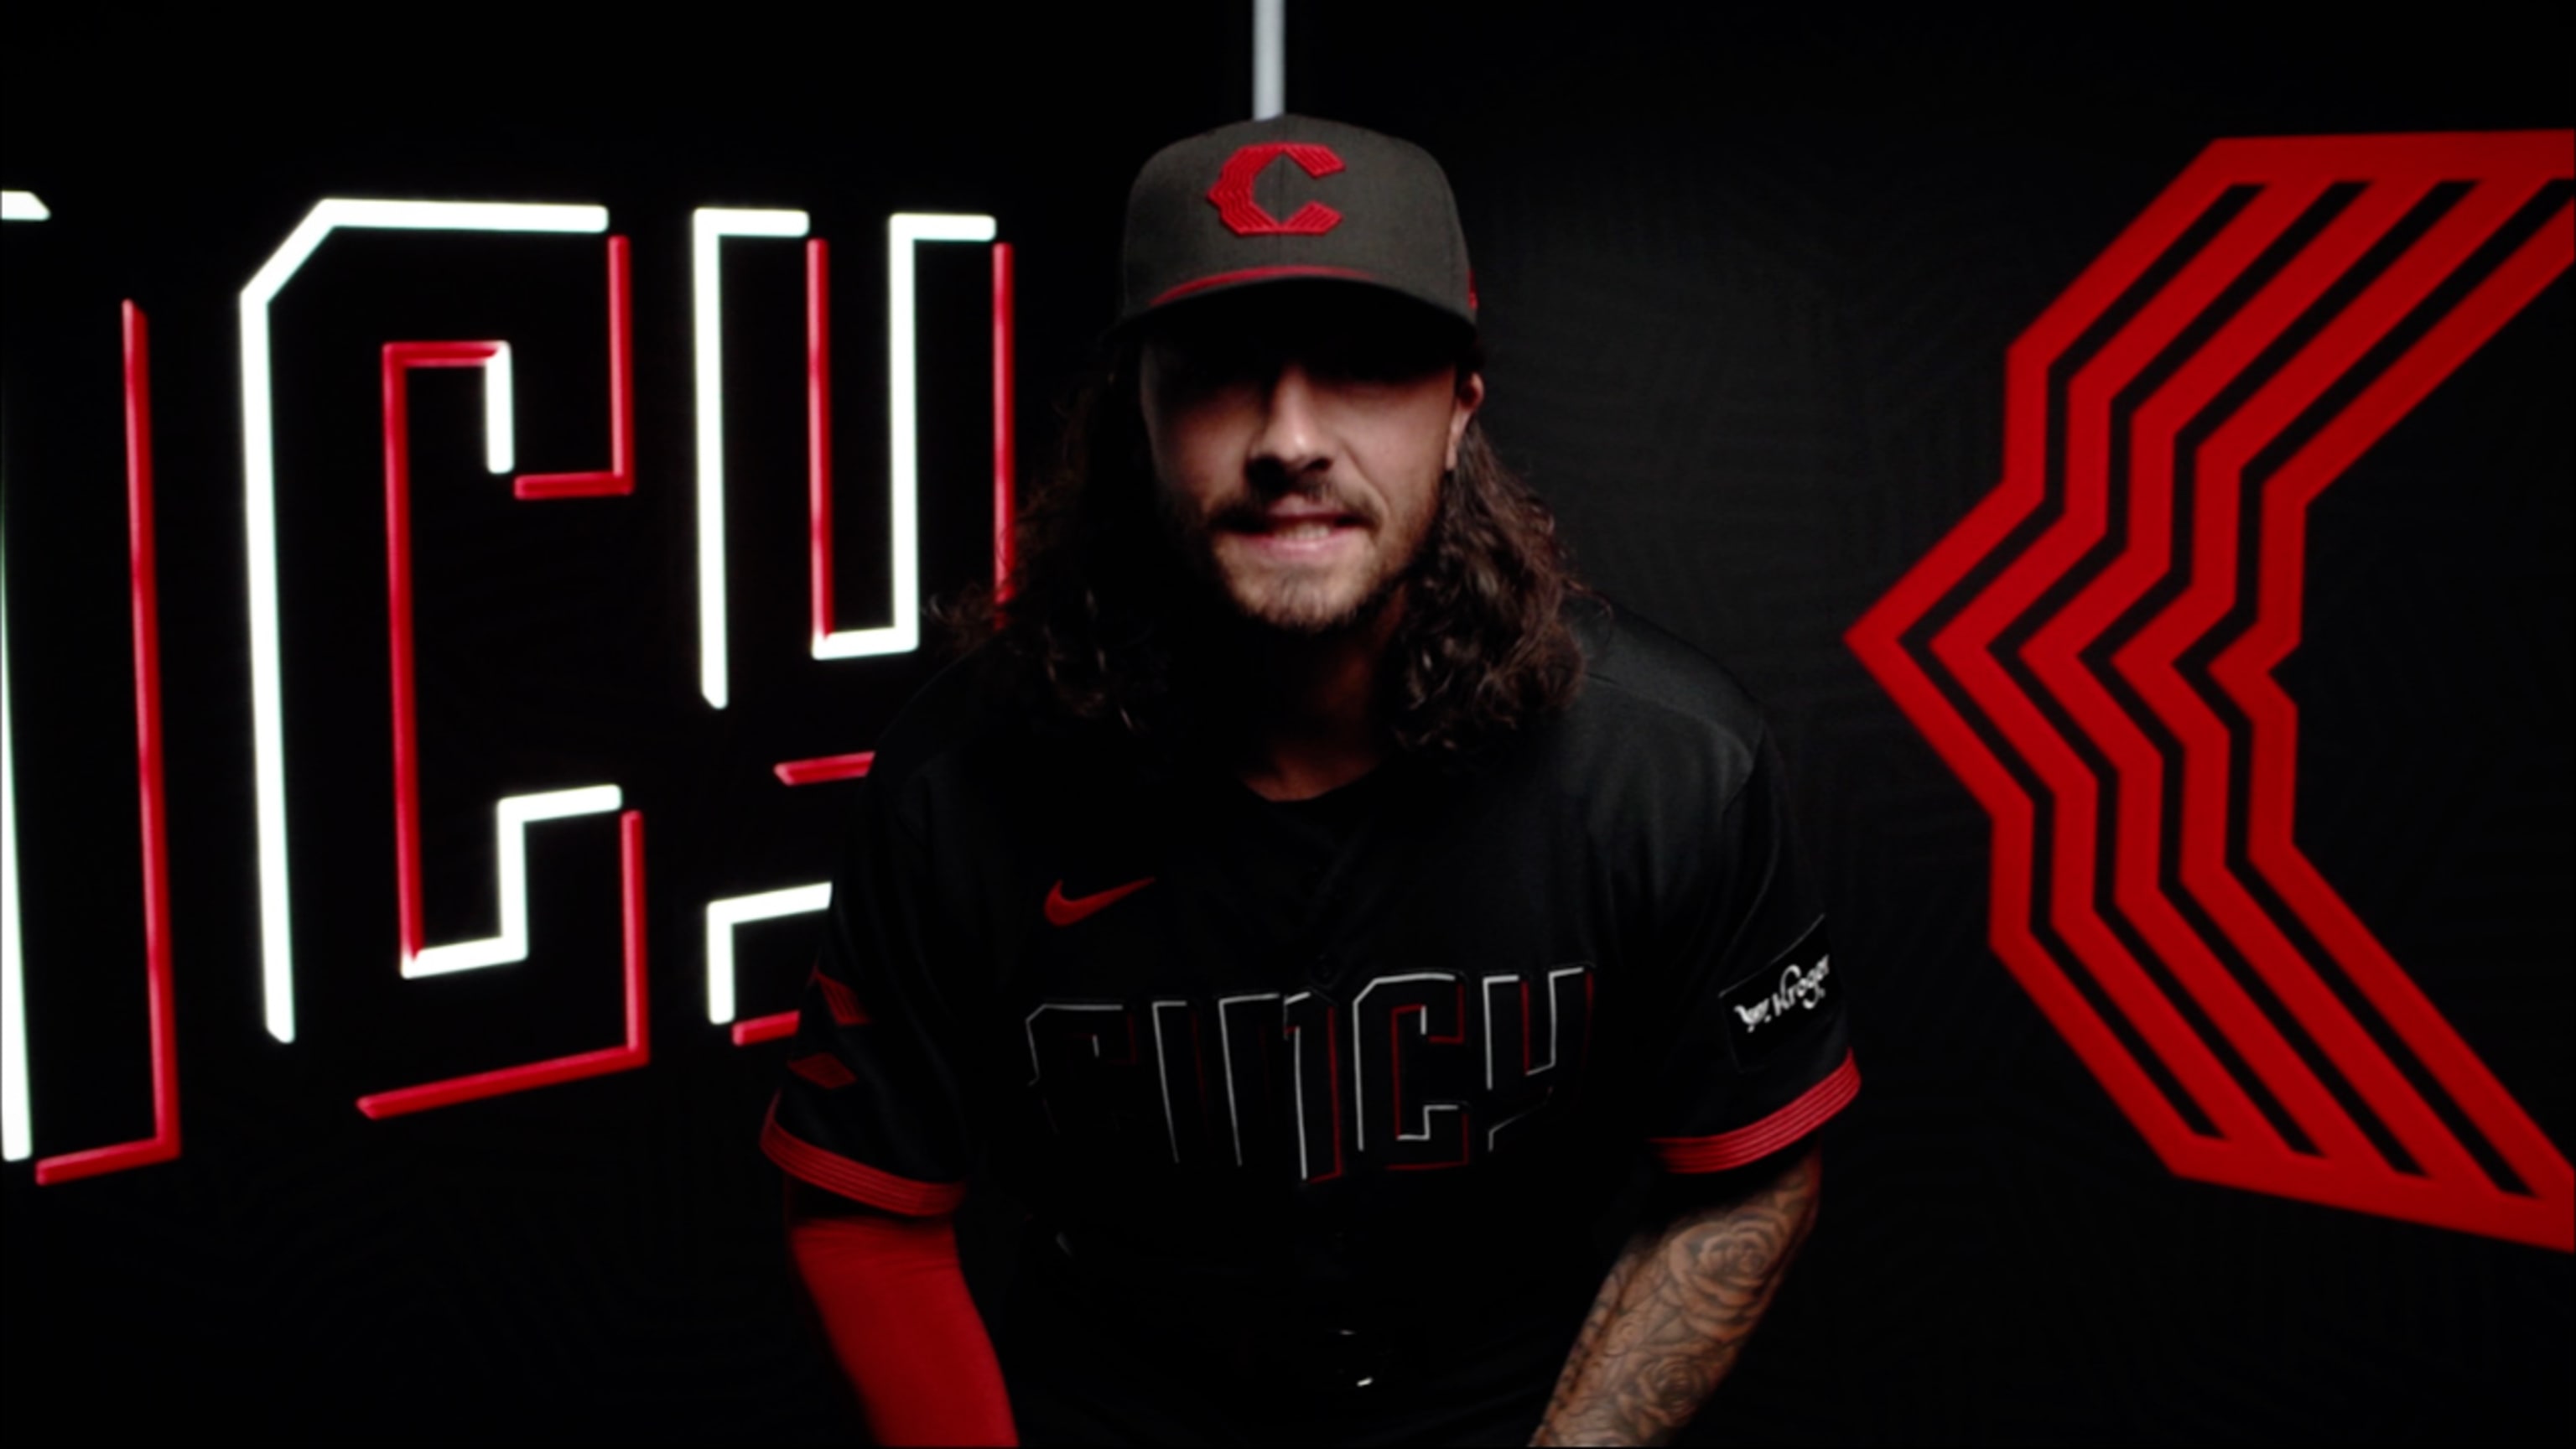 new uniforms reds city connect jersey